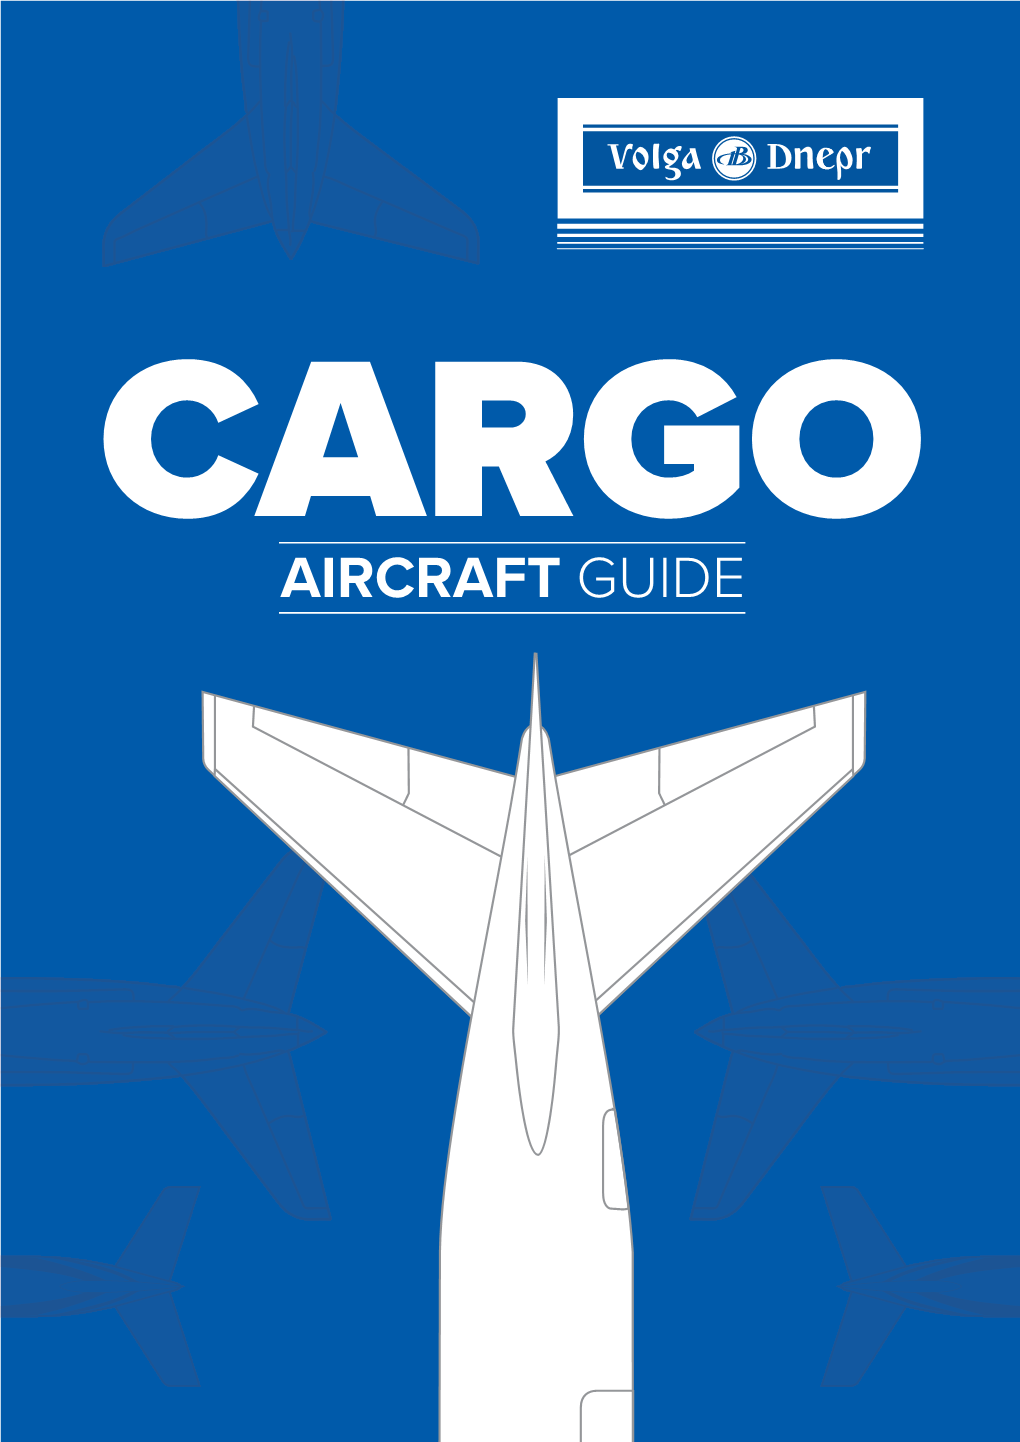 Aircraft Guide